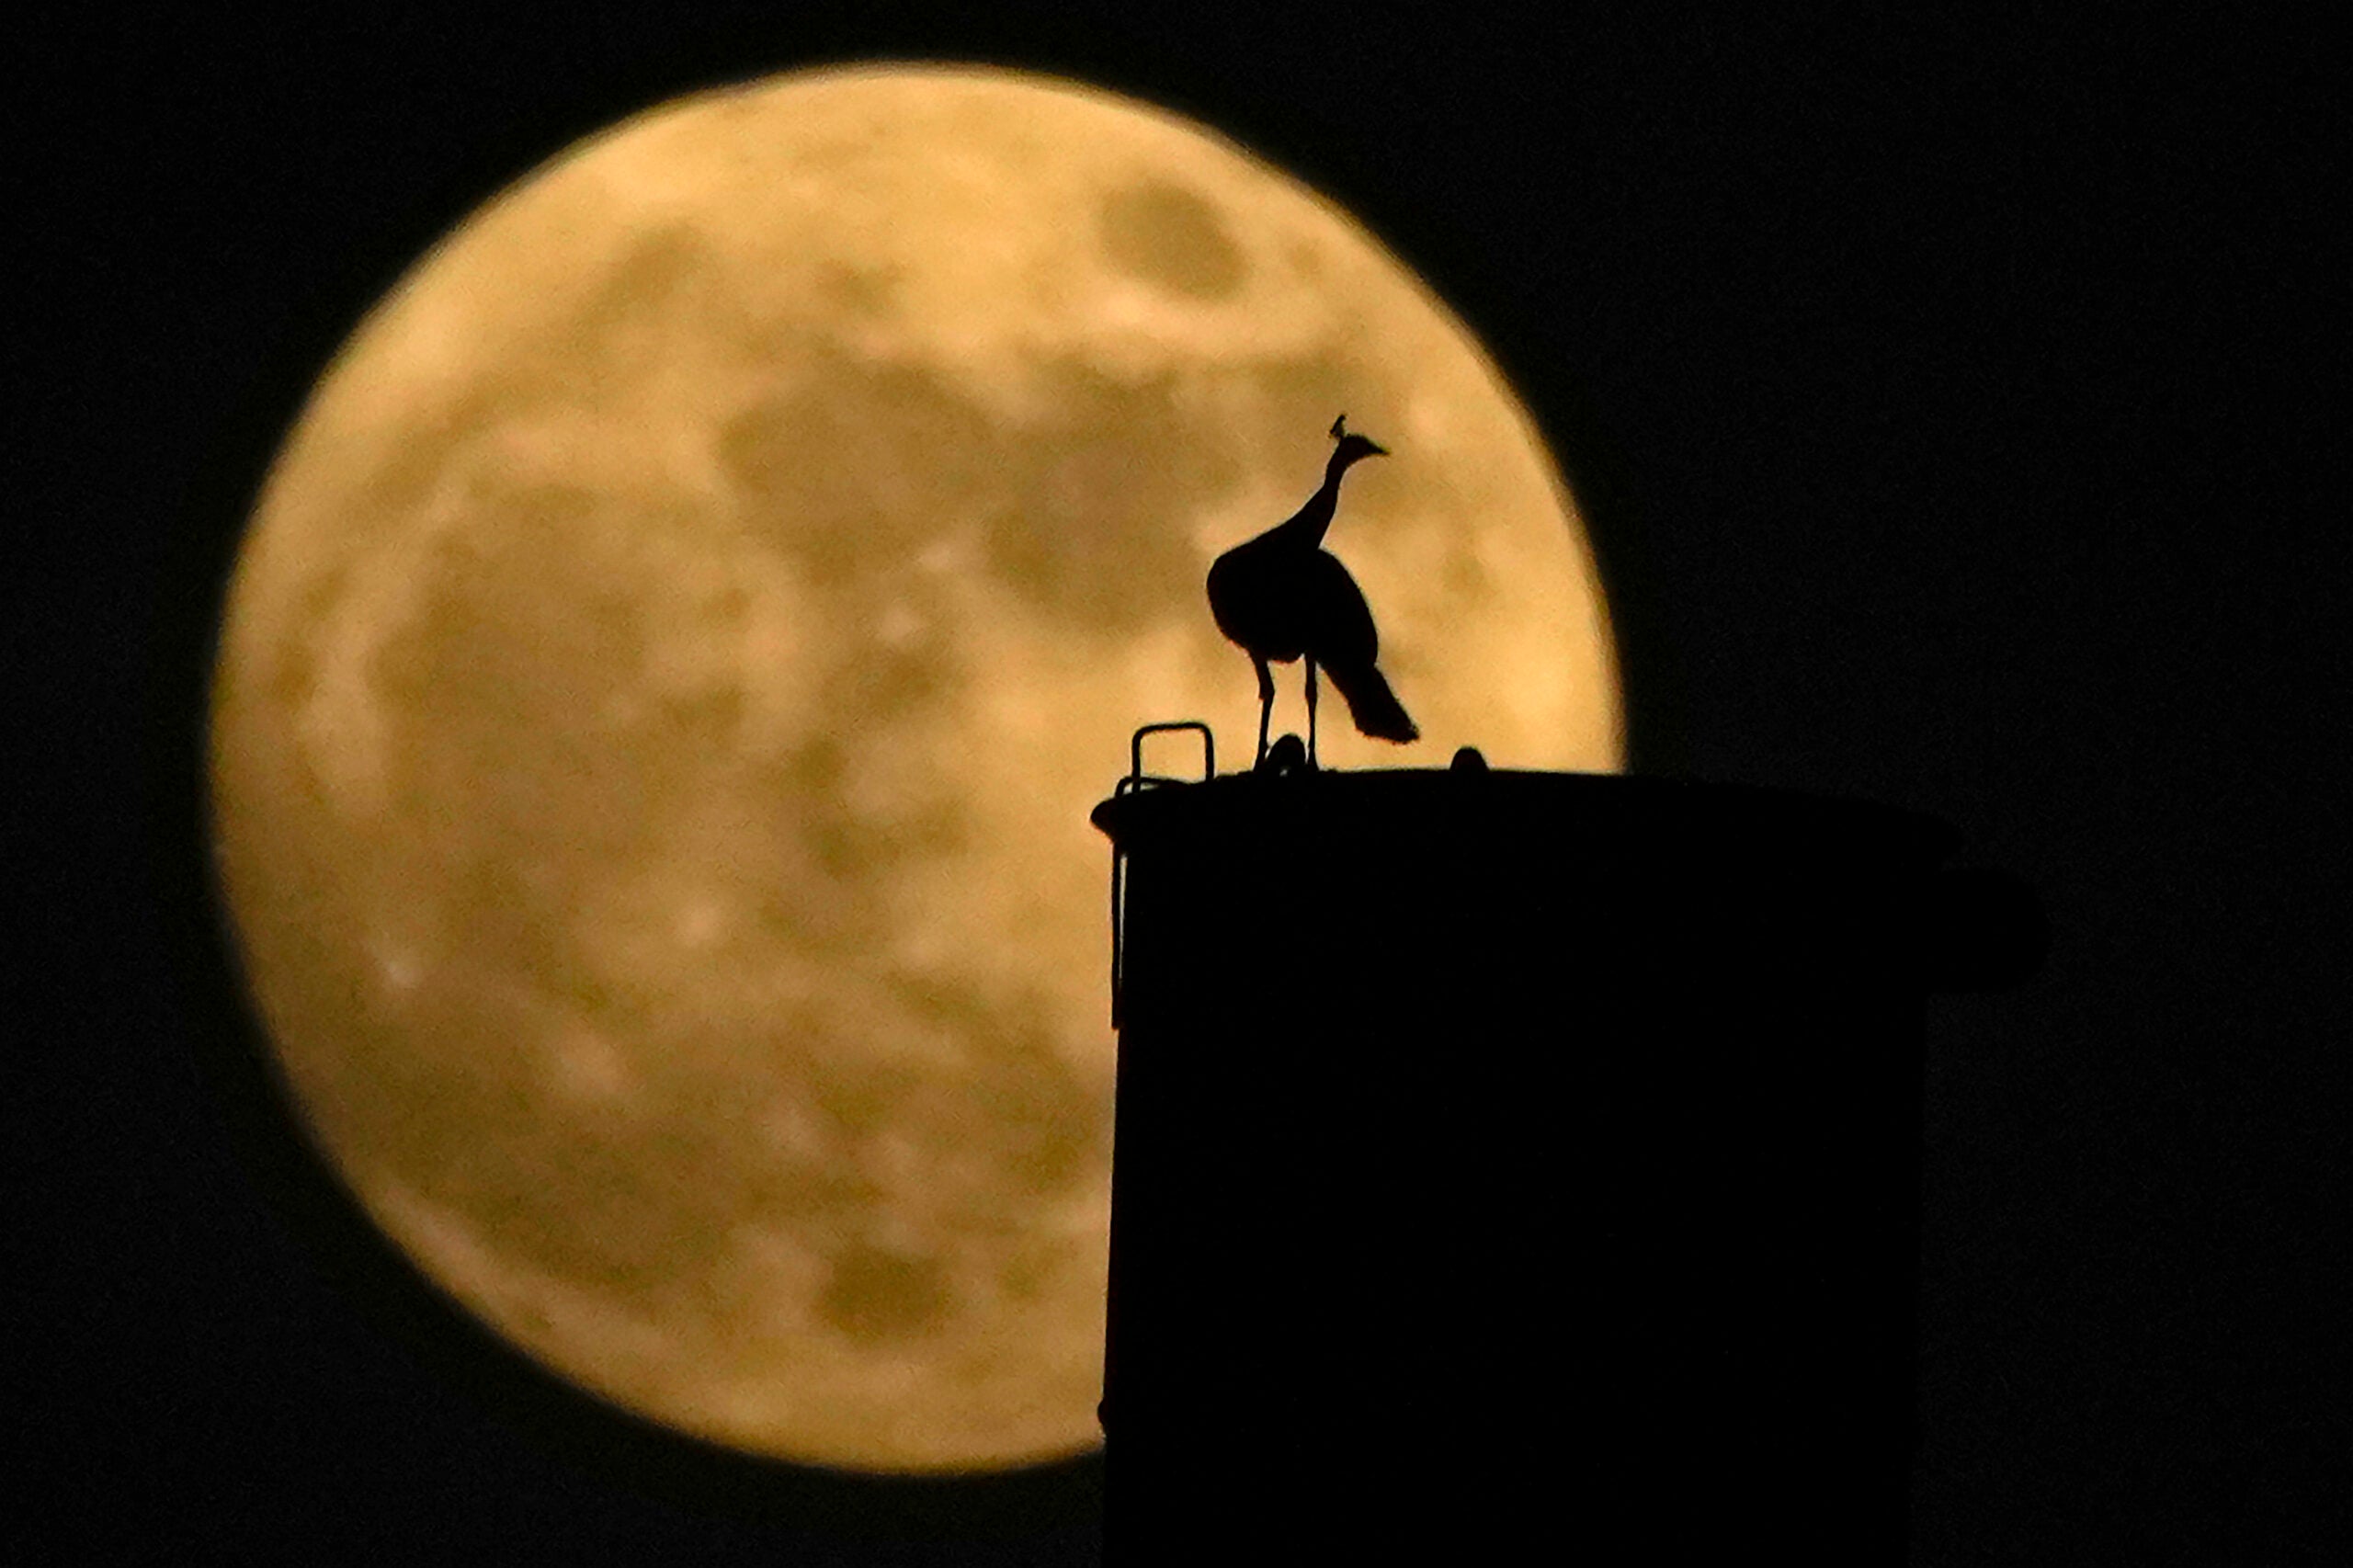 A peacock sits on a chimney as a nearly full moon rises behind it.